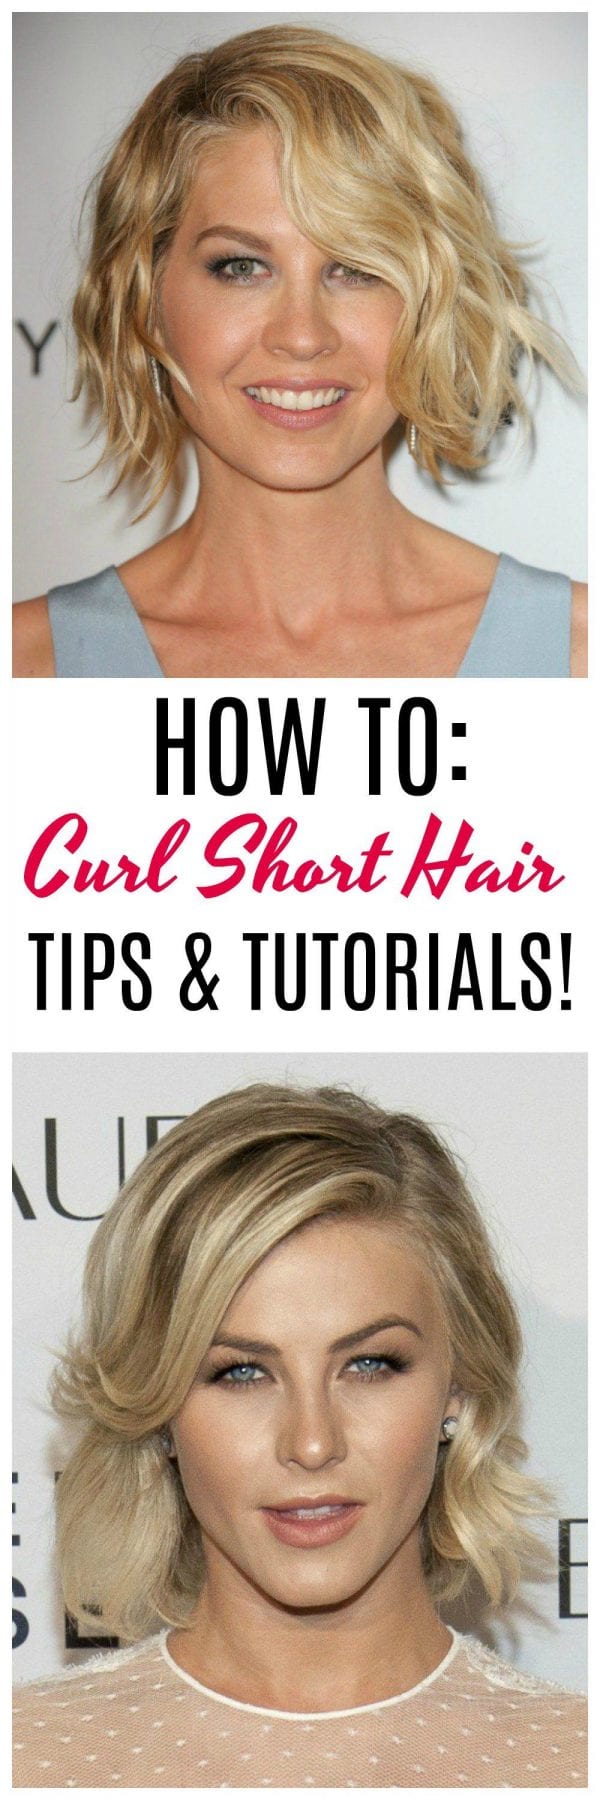 How to Curl Short Hair: Tips, Tricks and Tutorials